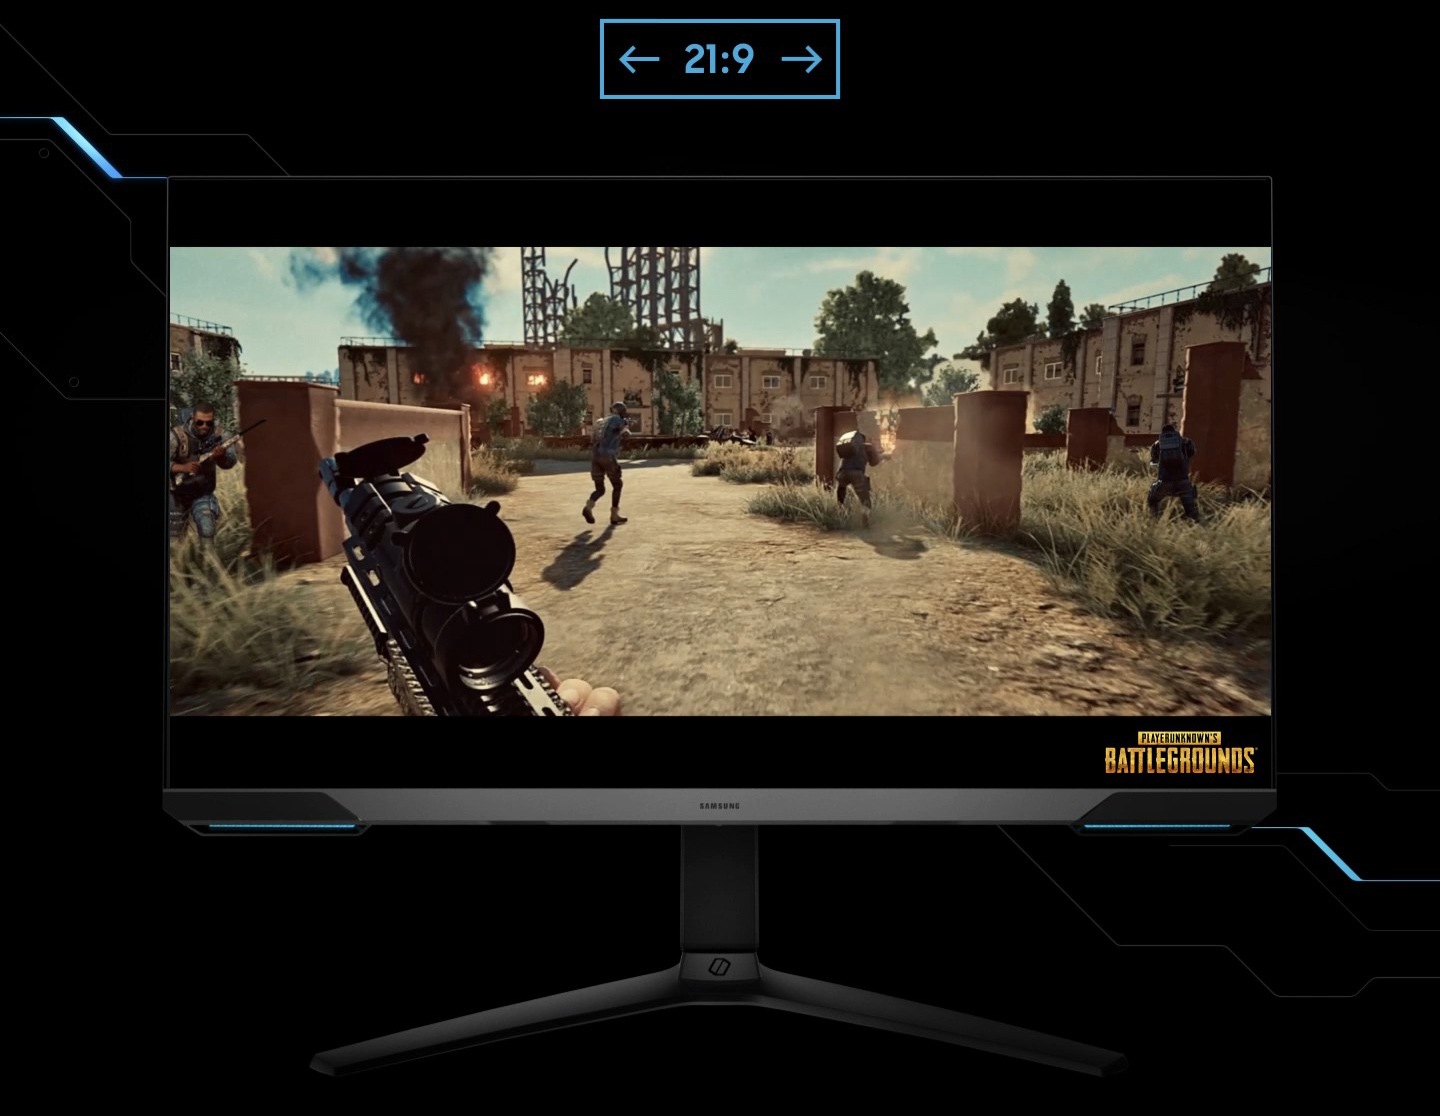 A monitor shows the perspective of a player within a first-person action game. As the screen is extended from 16:9 to 21:9 proportion, an enemy appears in the far left corner, revealed thanks to the monitor's wider perspective.